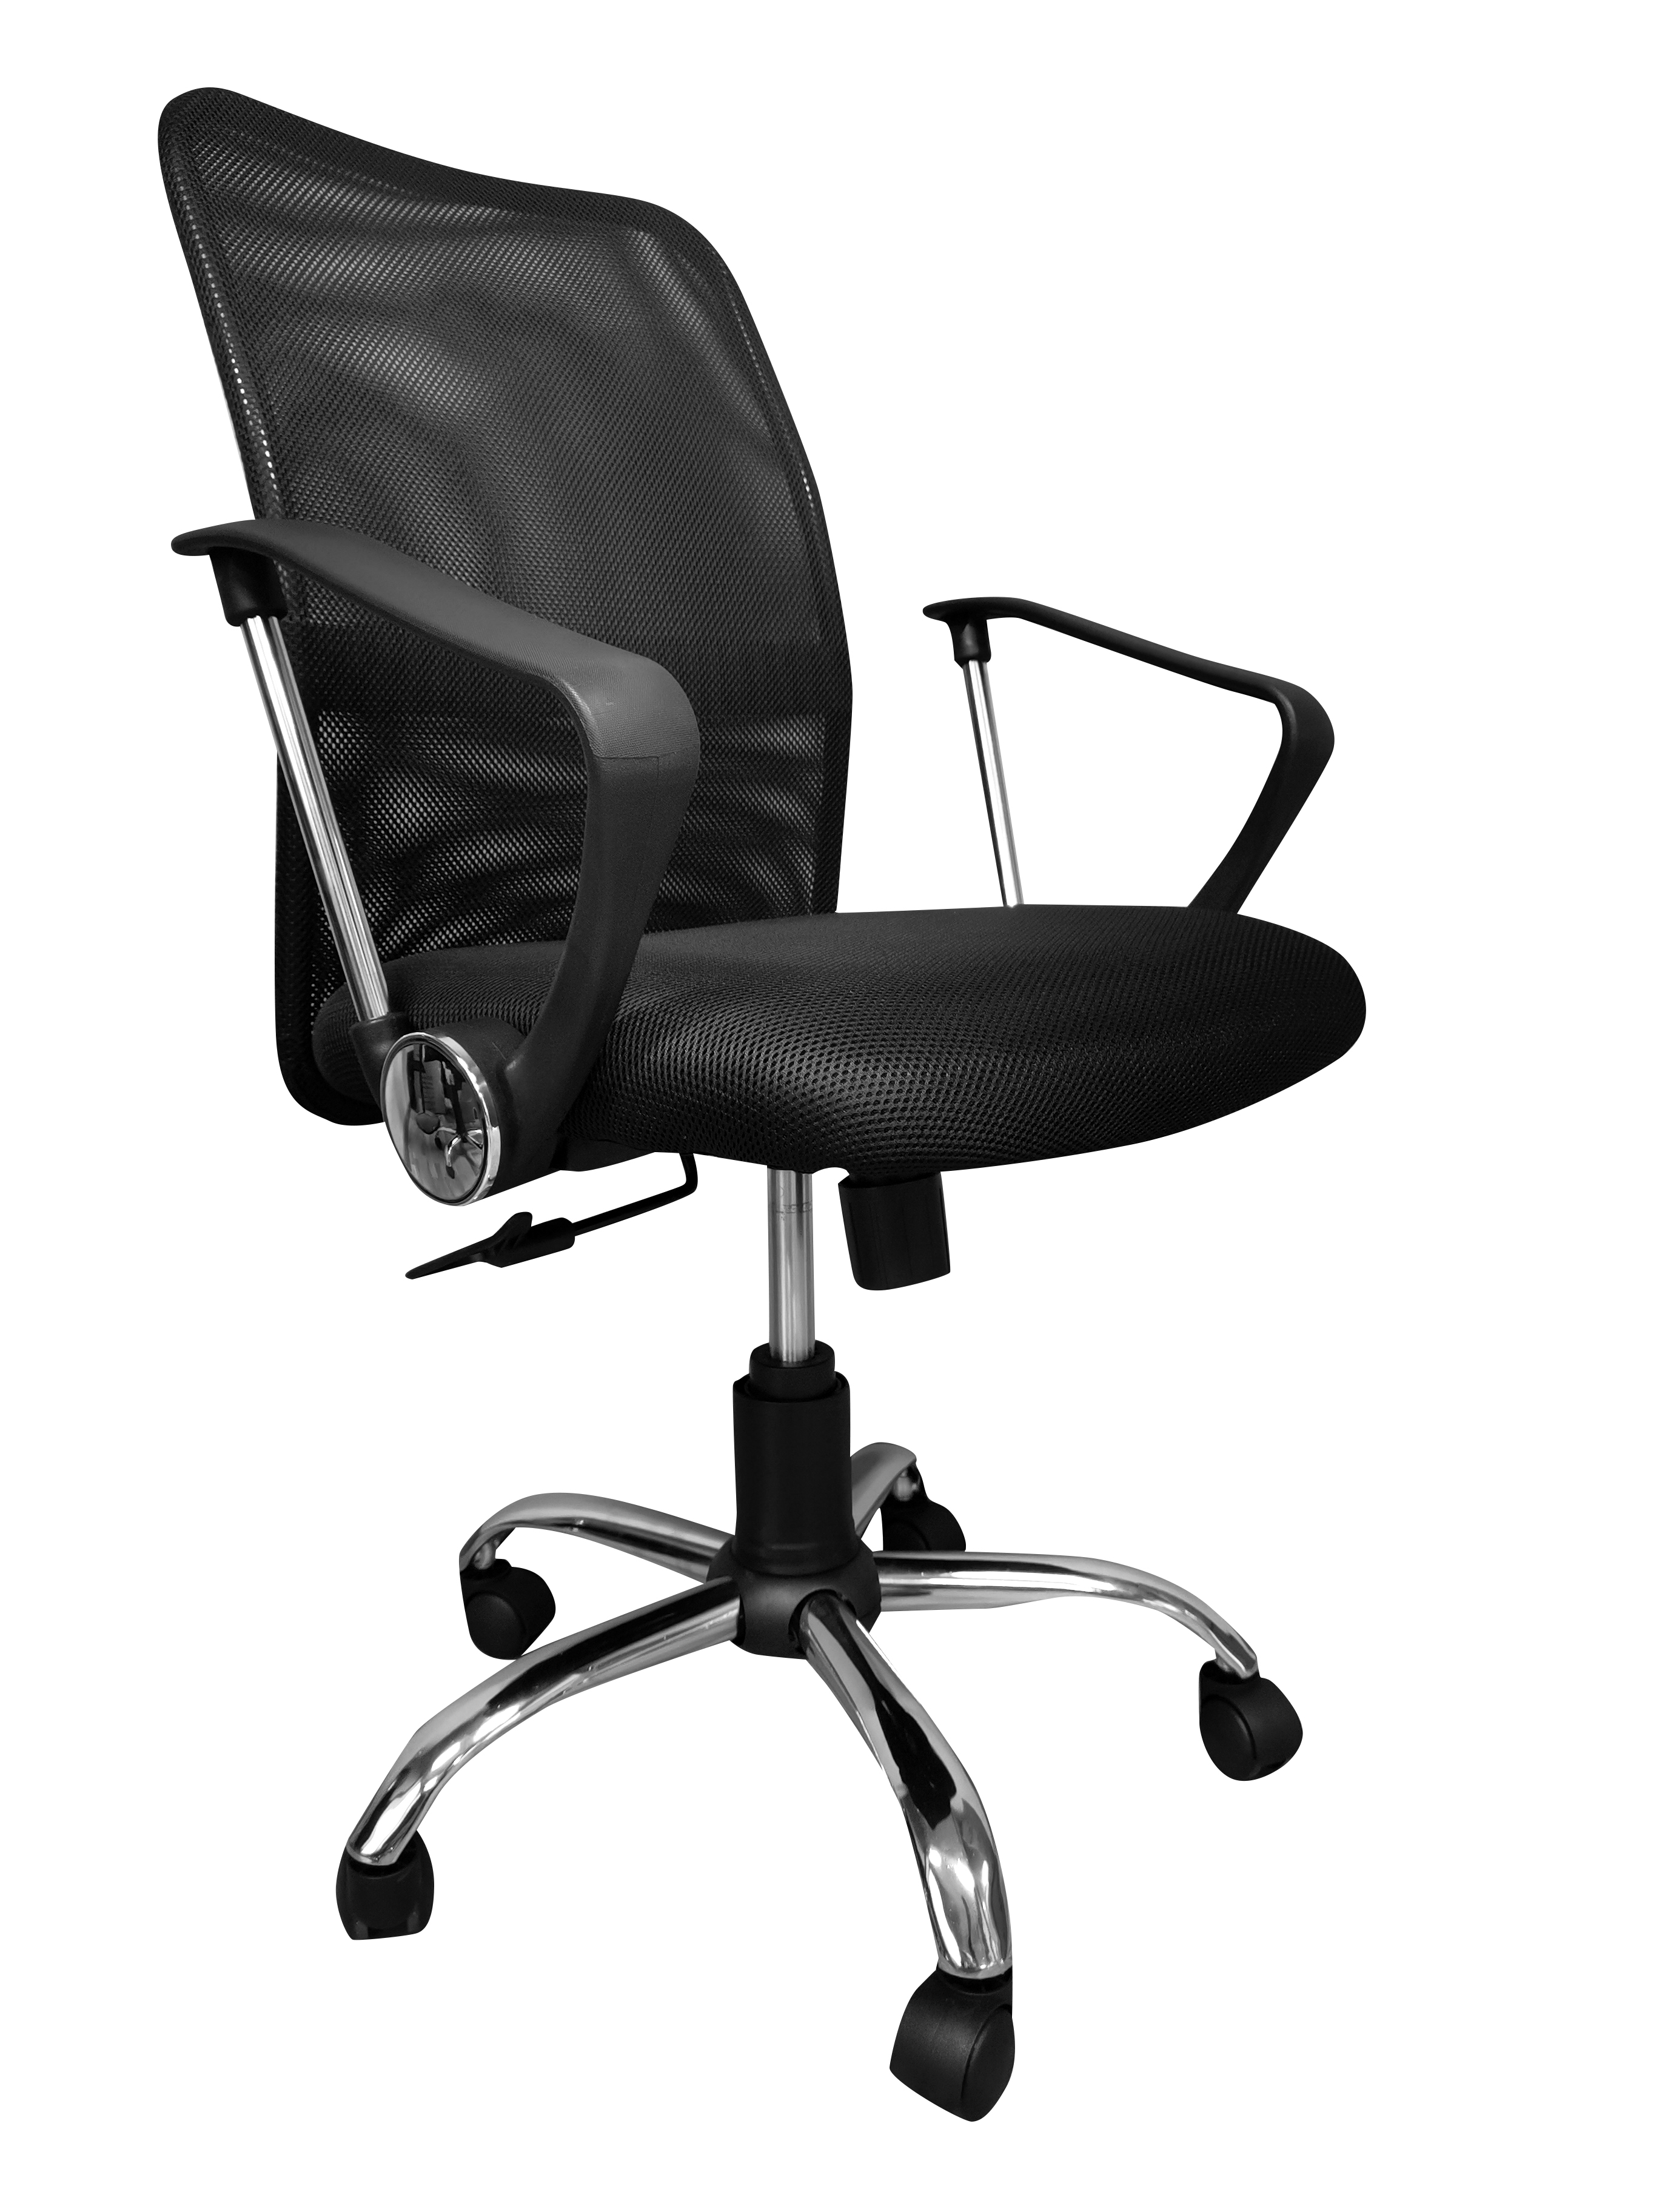 Super Lowest Price Office Depot Gaming Chair - Mid Back Economical Best Home Office Chair Under 50 – GDHERO